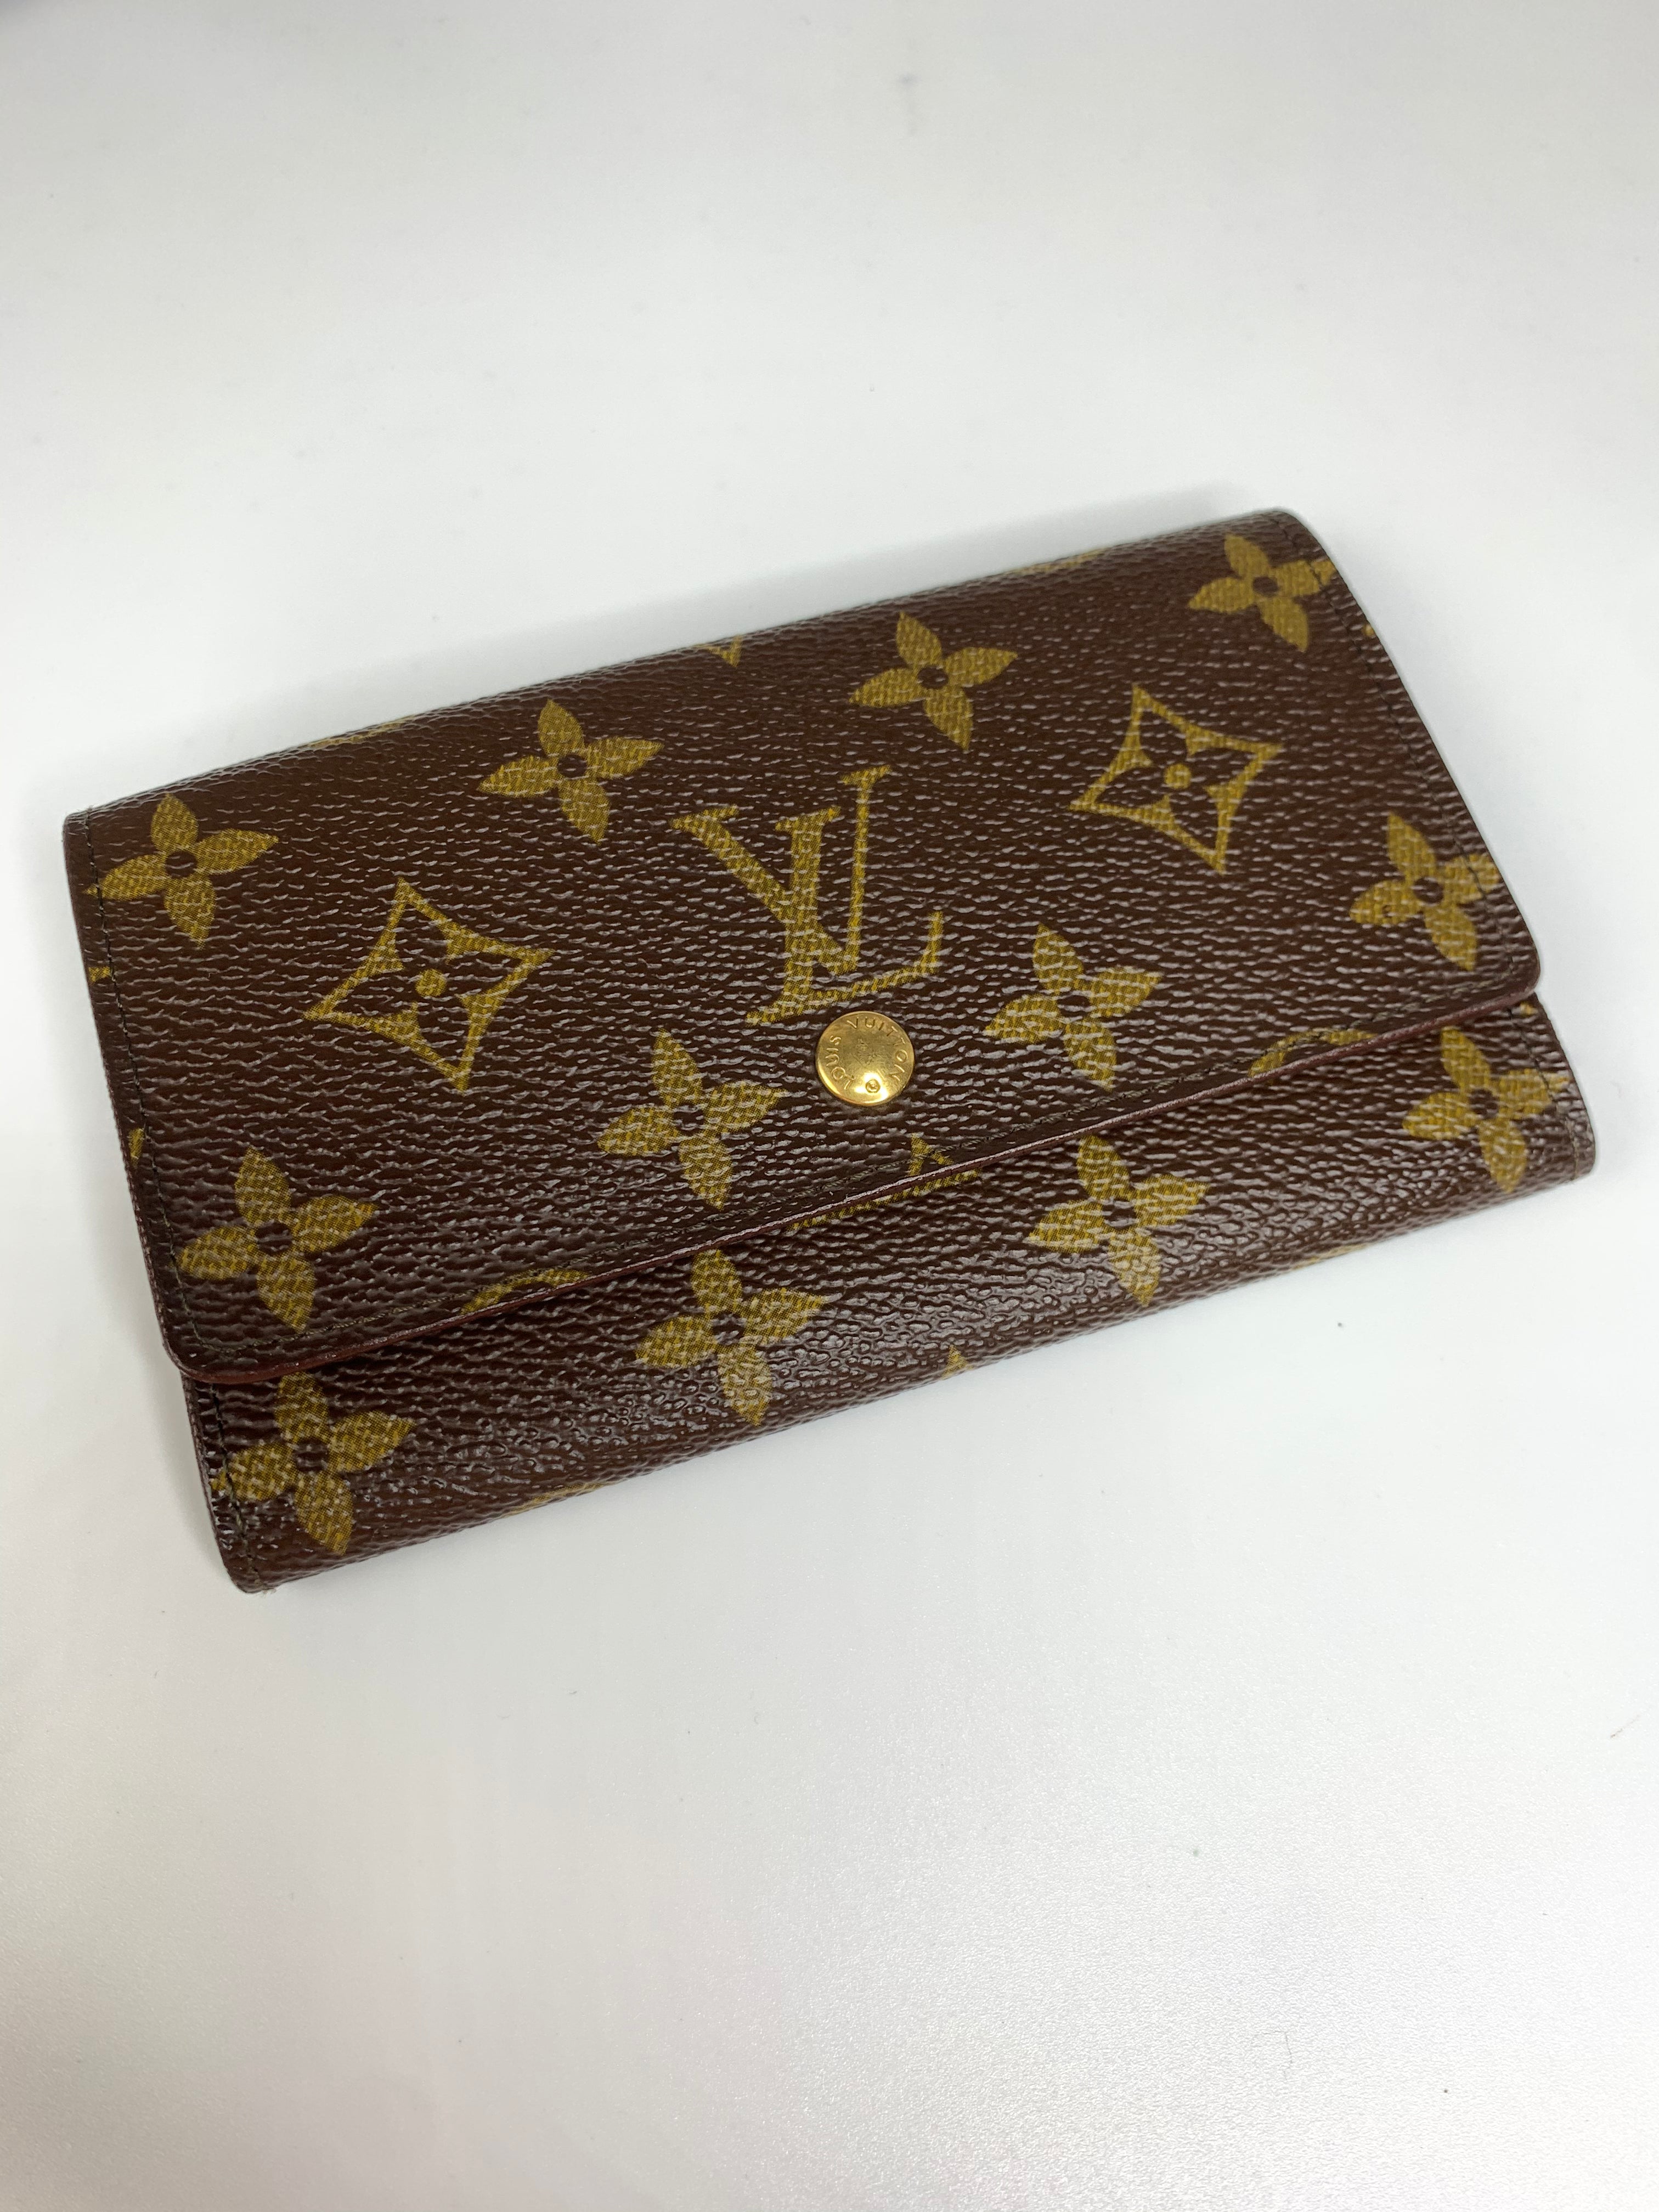 small womens wallet lv